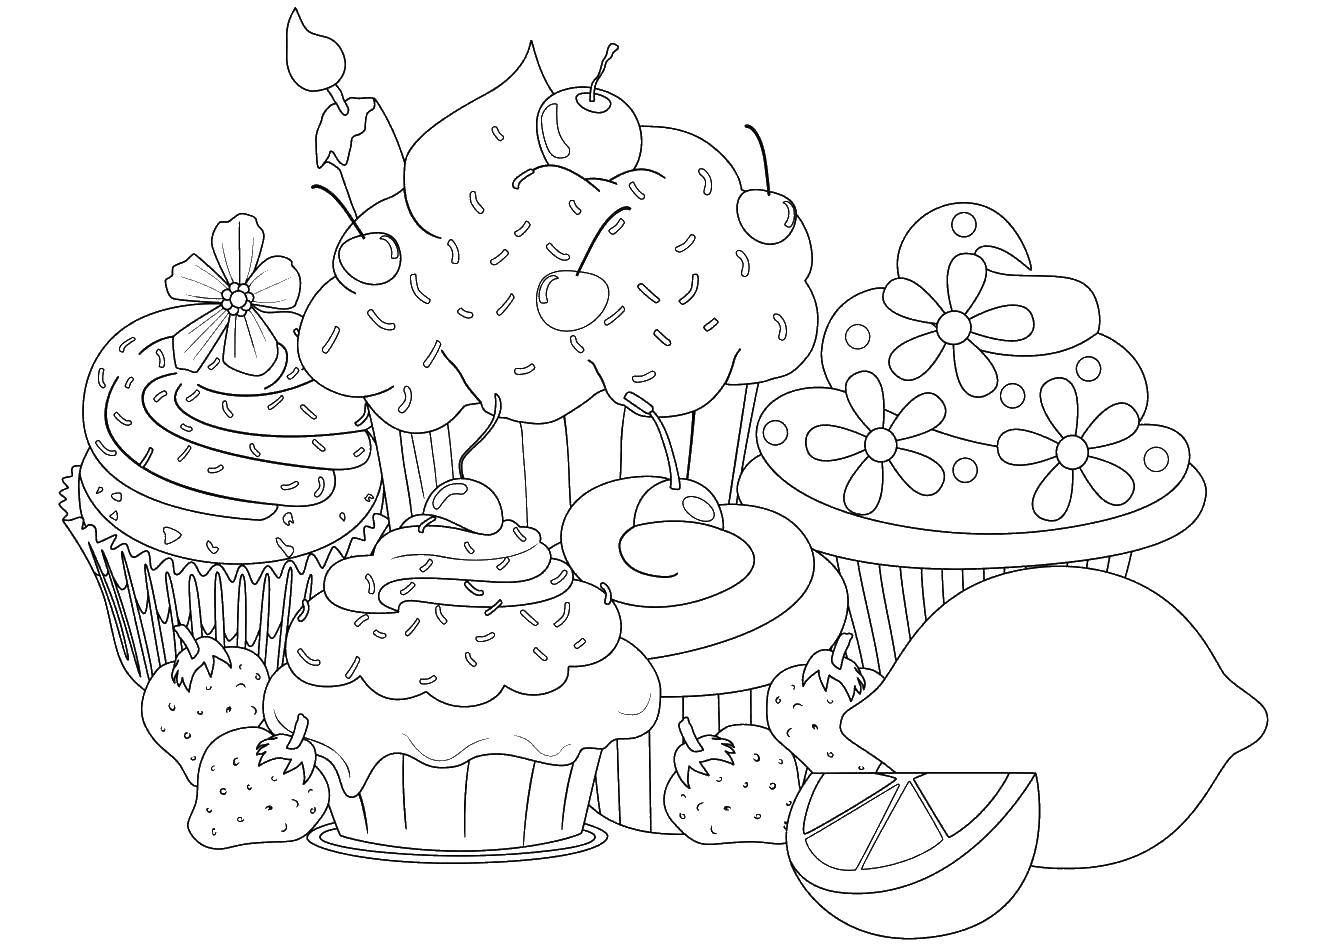 Coloring Sweets, cupcakes. Category sweets. Tags:  sweets, cupcakes.